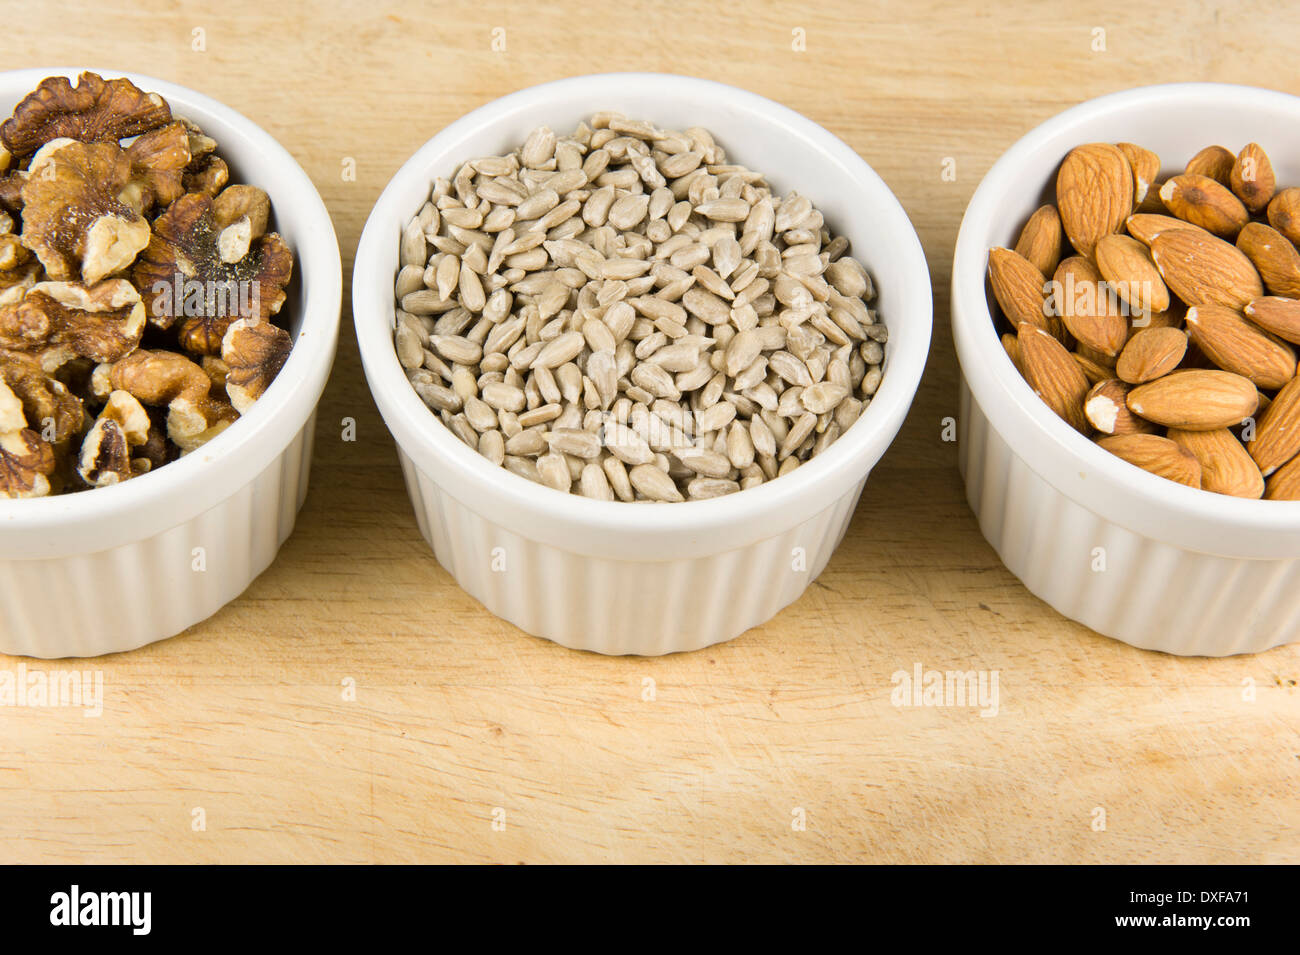 Close up photograph of three white ramekin bowls individually filled with walnuts, sunflower seed, and almonds. Stock Photo